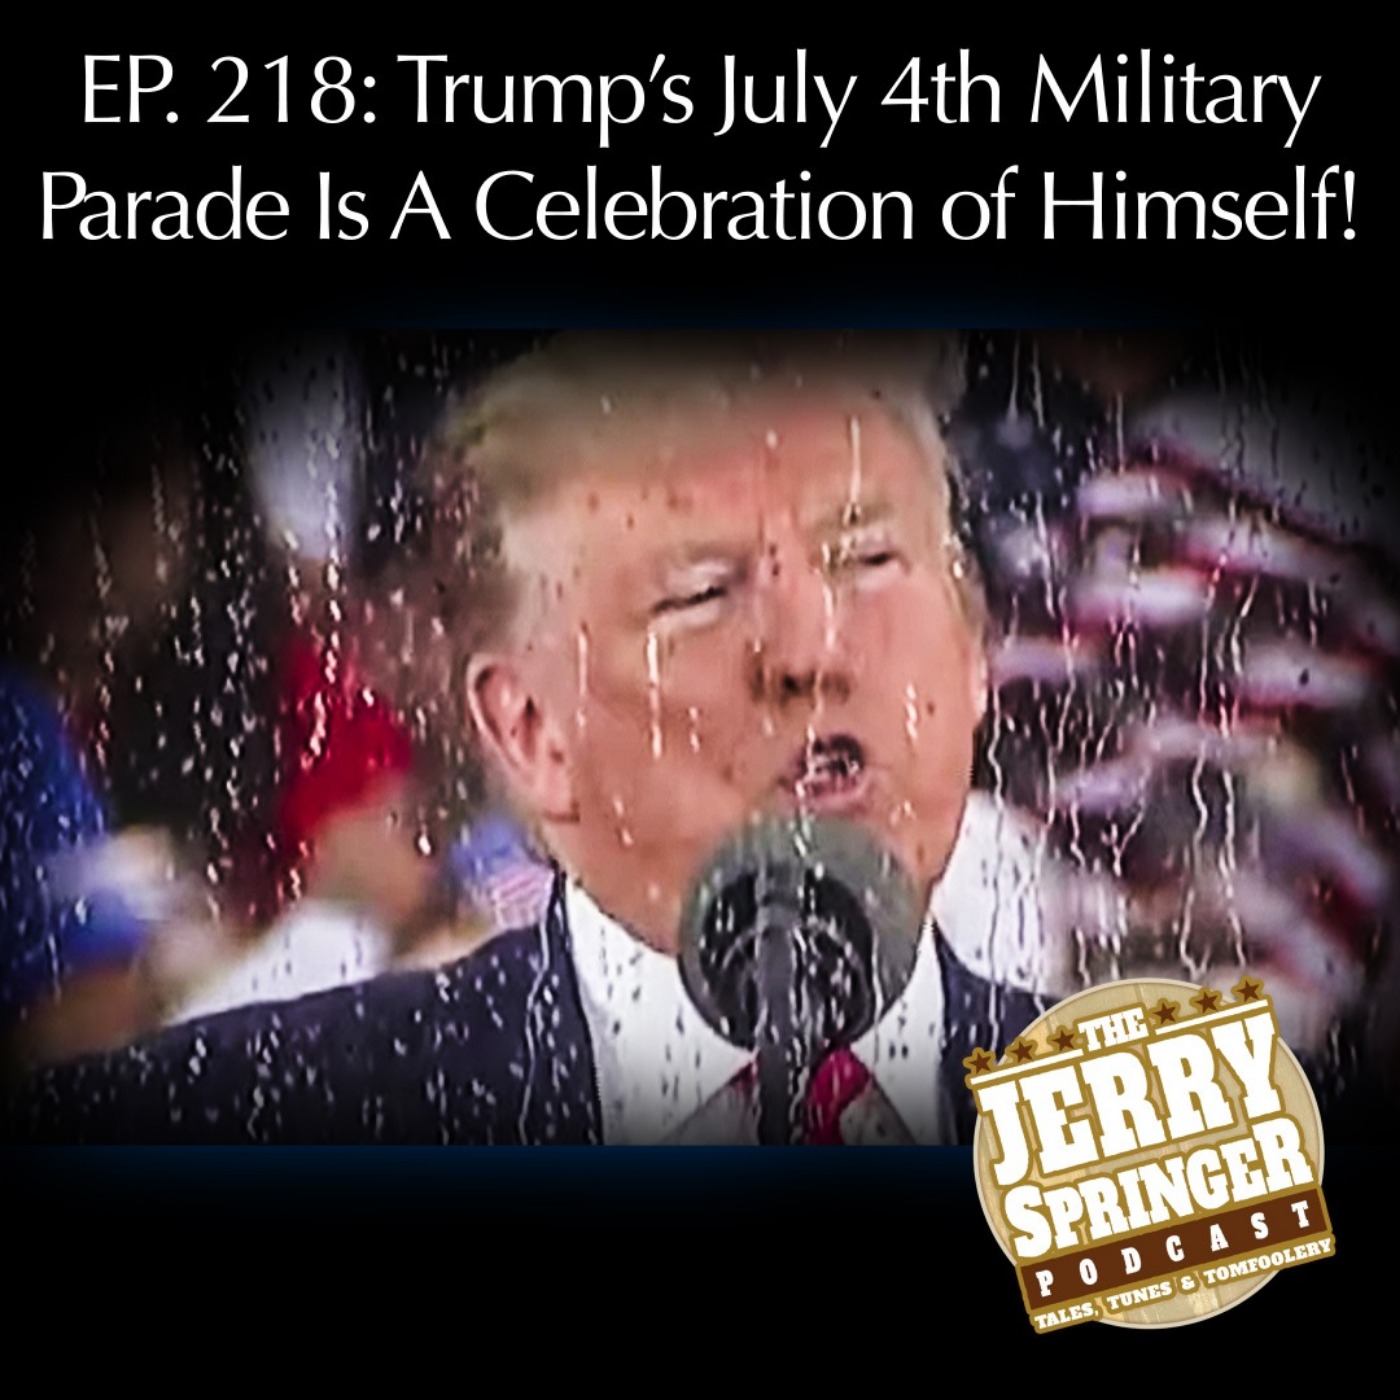 Trump's 4th of July Military Parade Is a Celebration of Himself! - EP 218